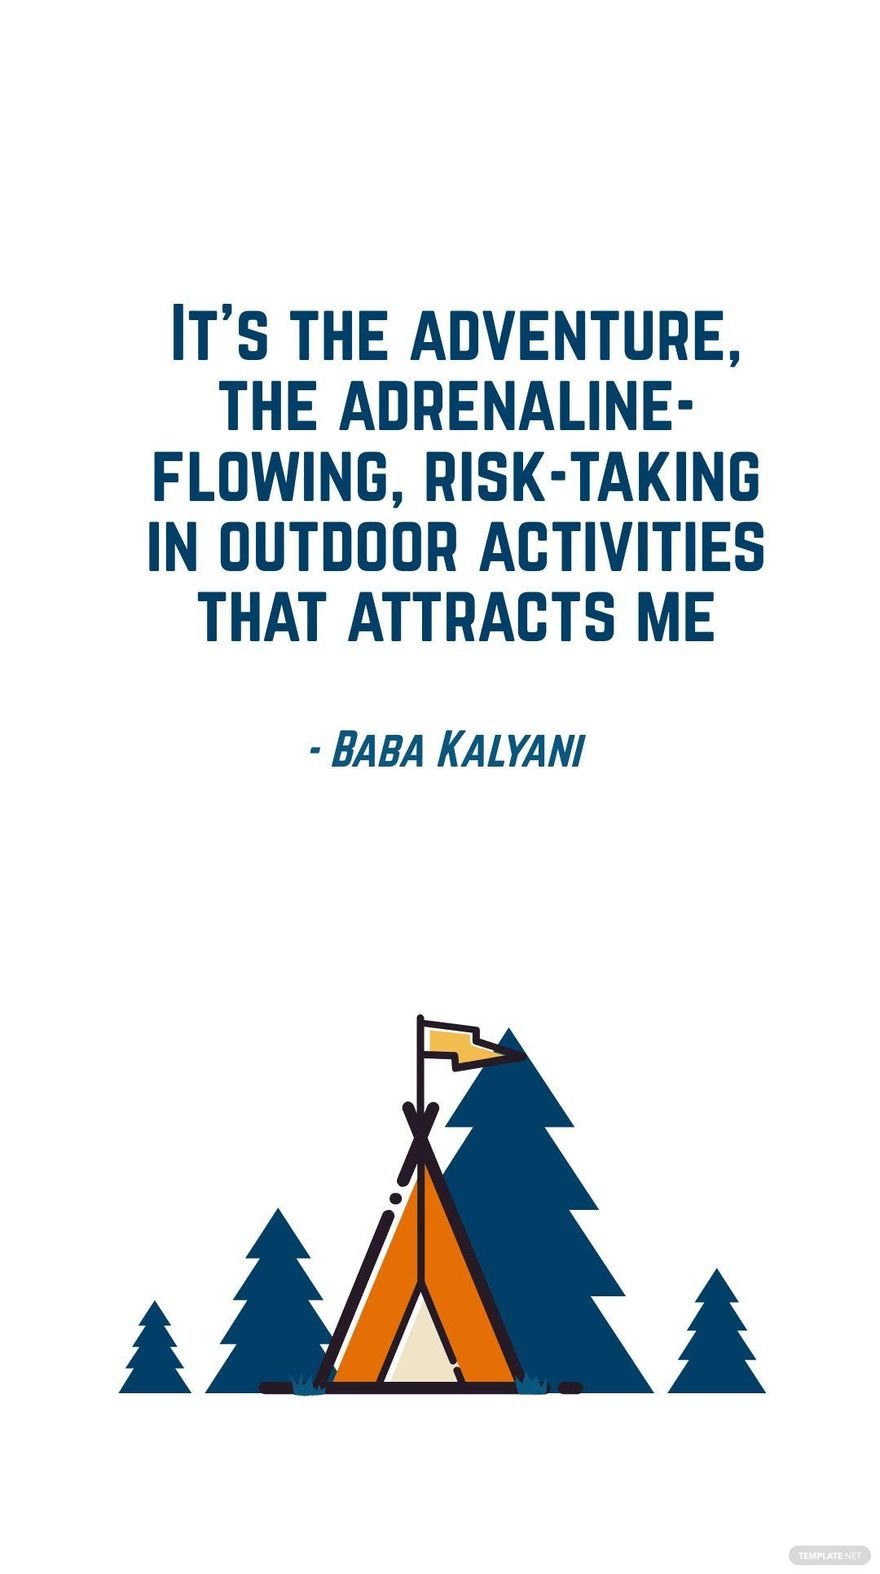 Baba Kalyani - It's the adventure, the adrenaline-flowing, risk-taking in outdoor activities that attracts me